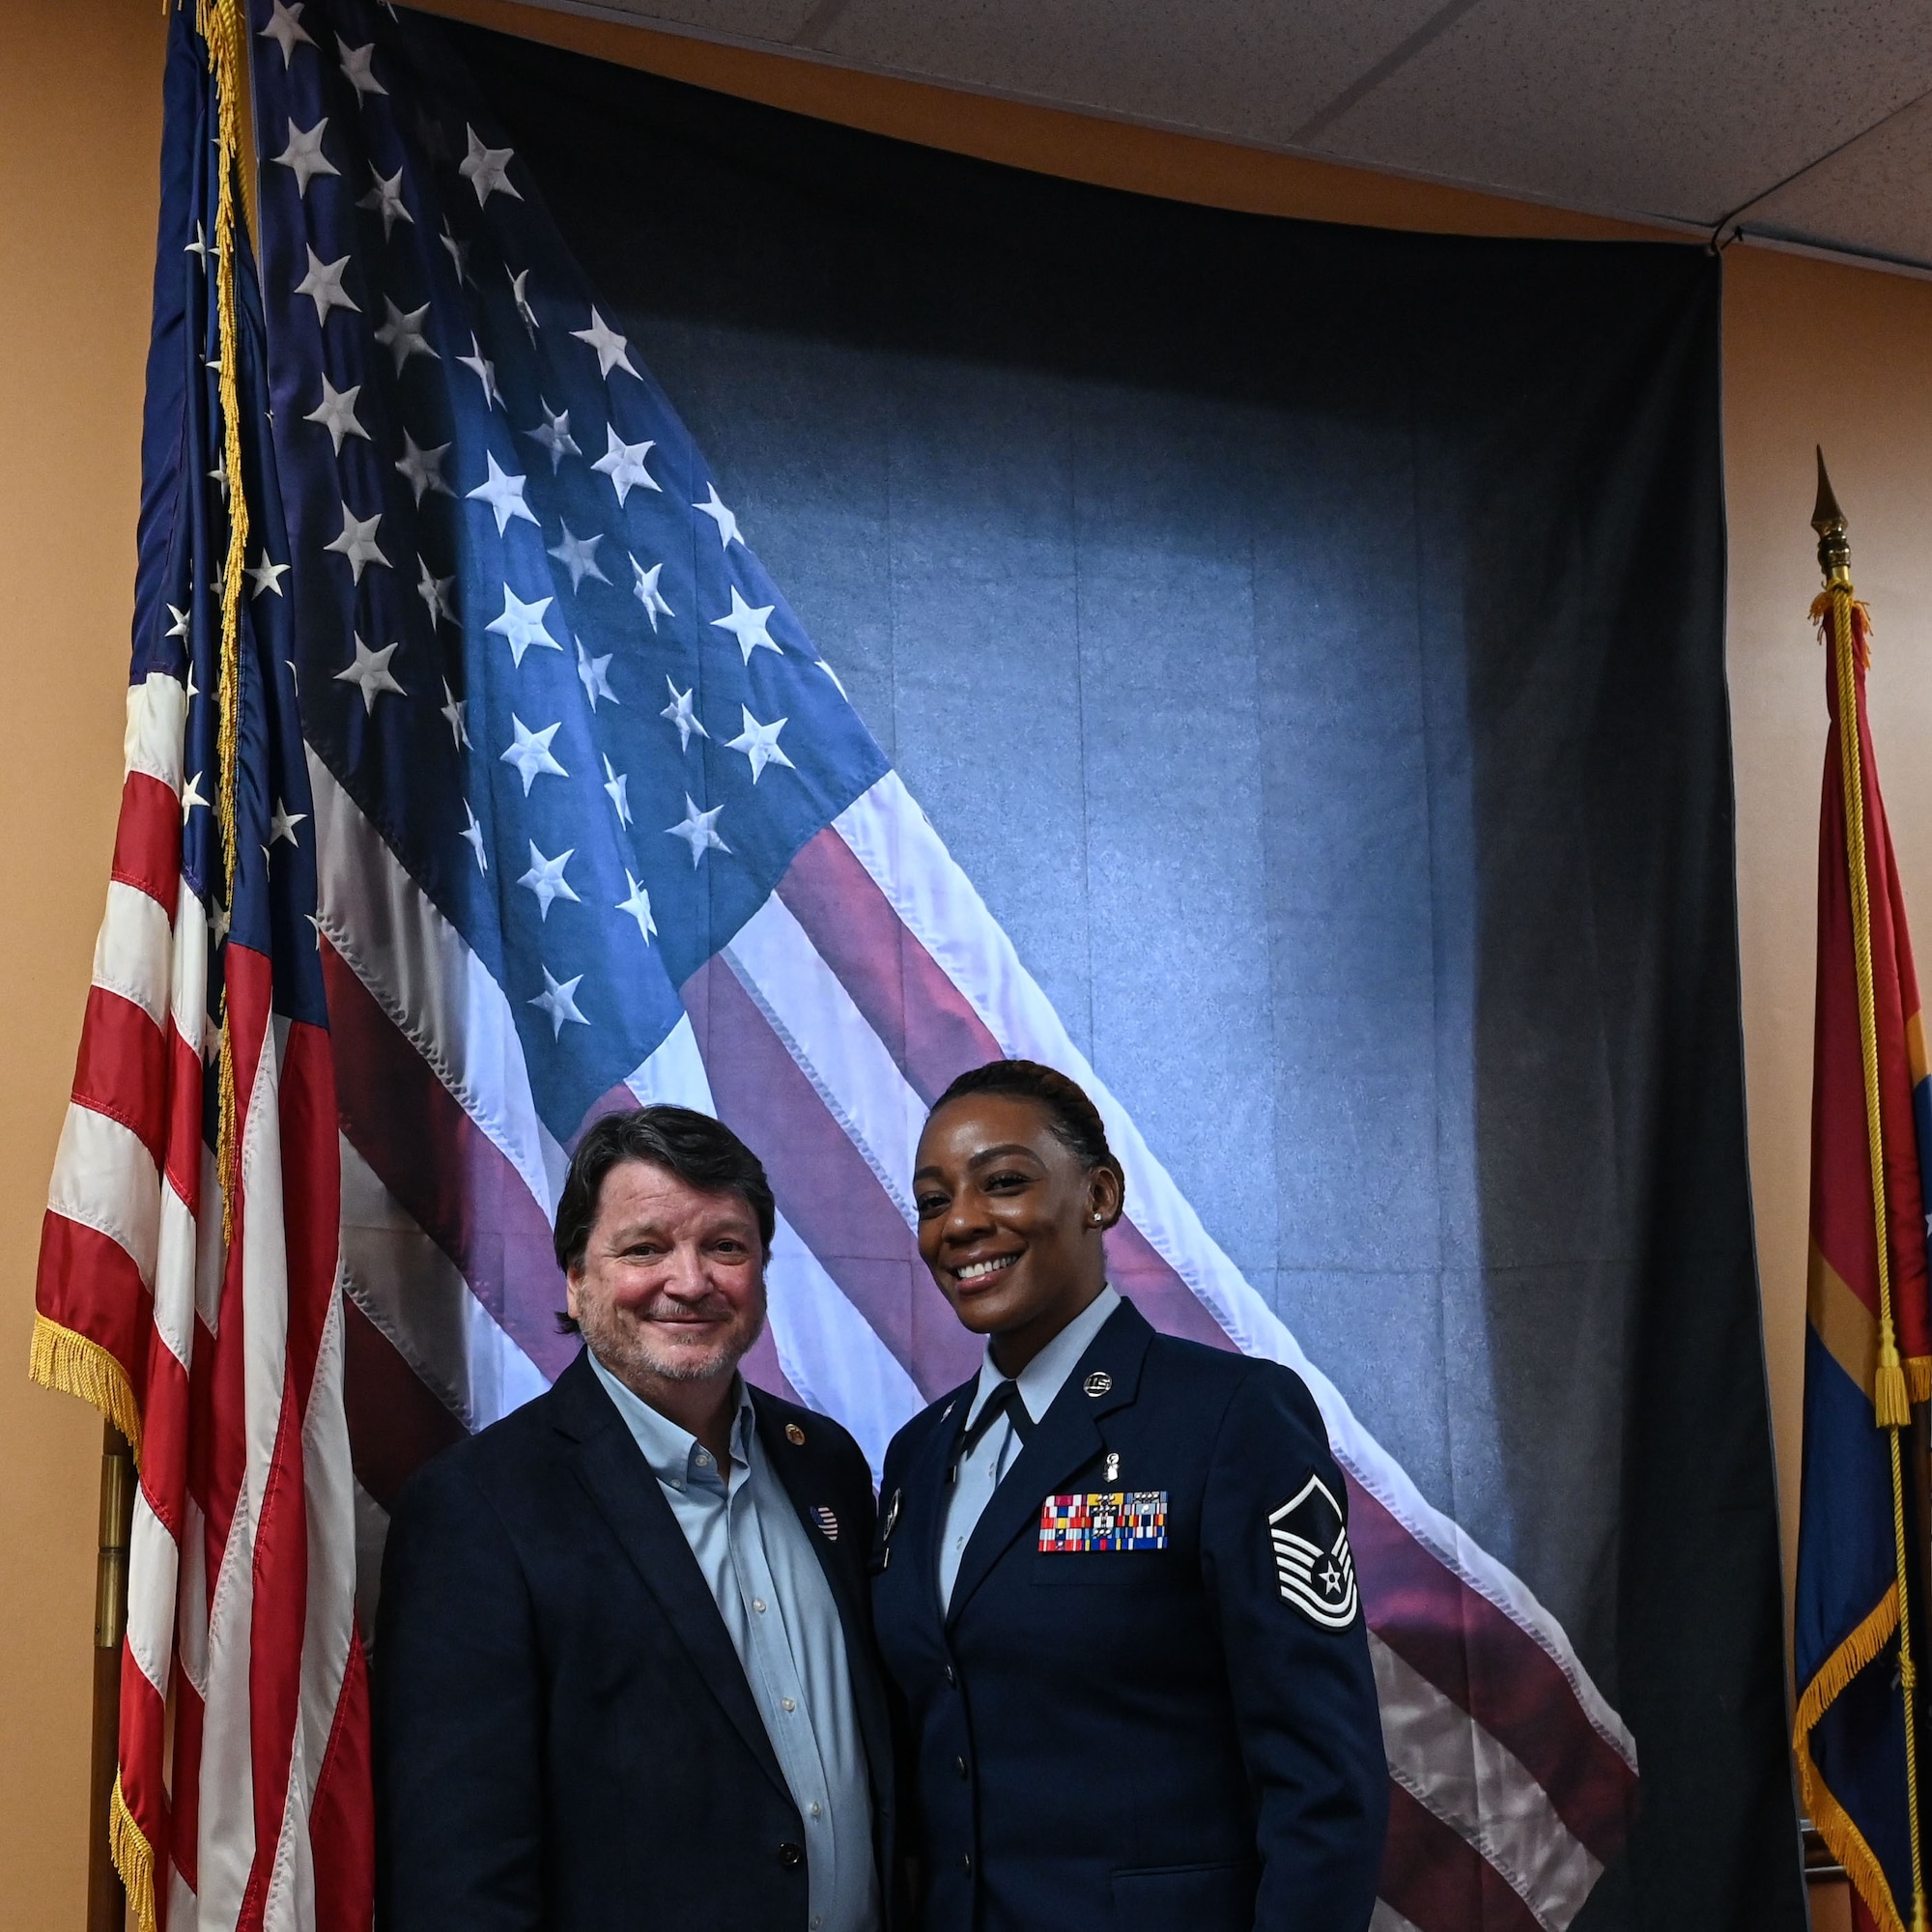 Mayor of Columbus MS. and MSgt Washington pose for a photo.